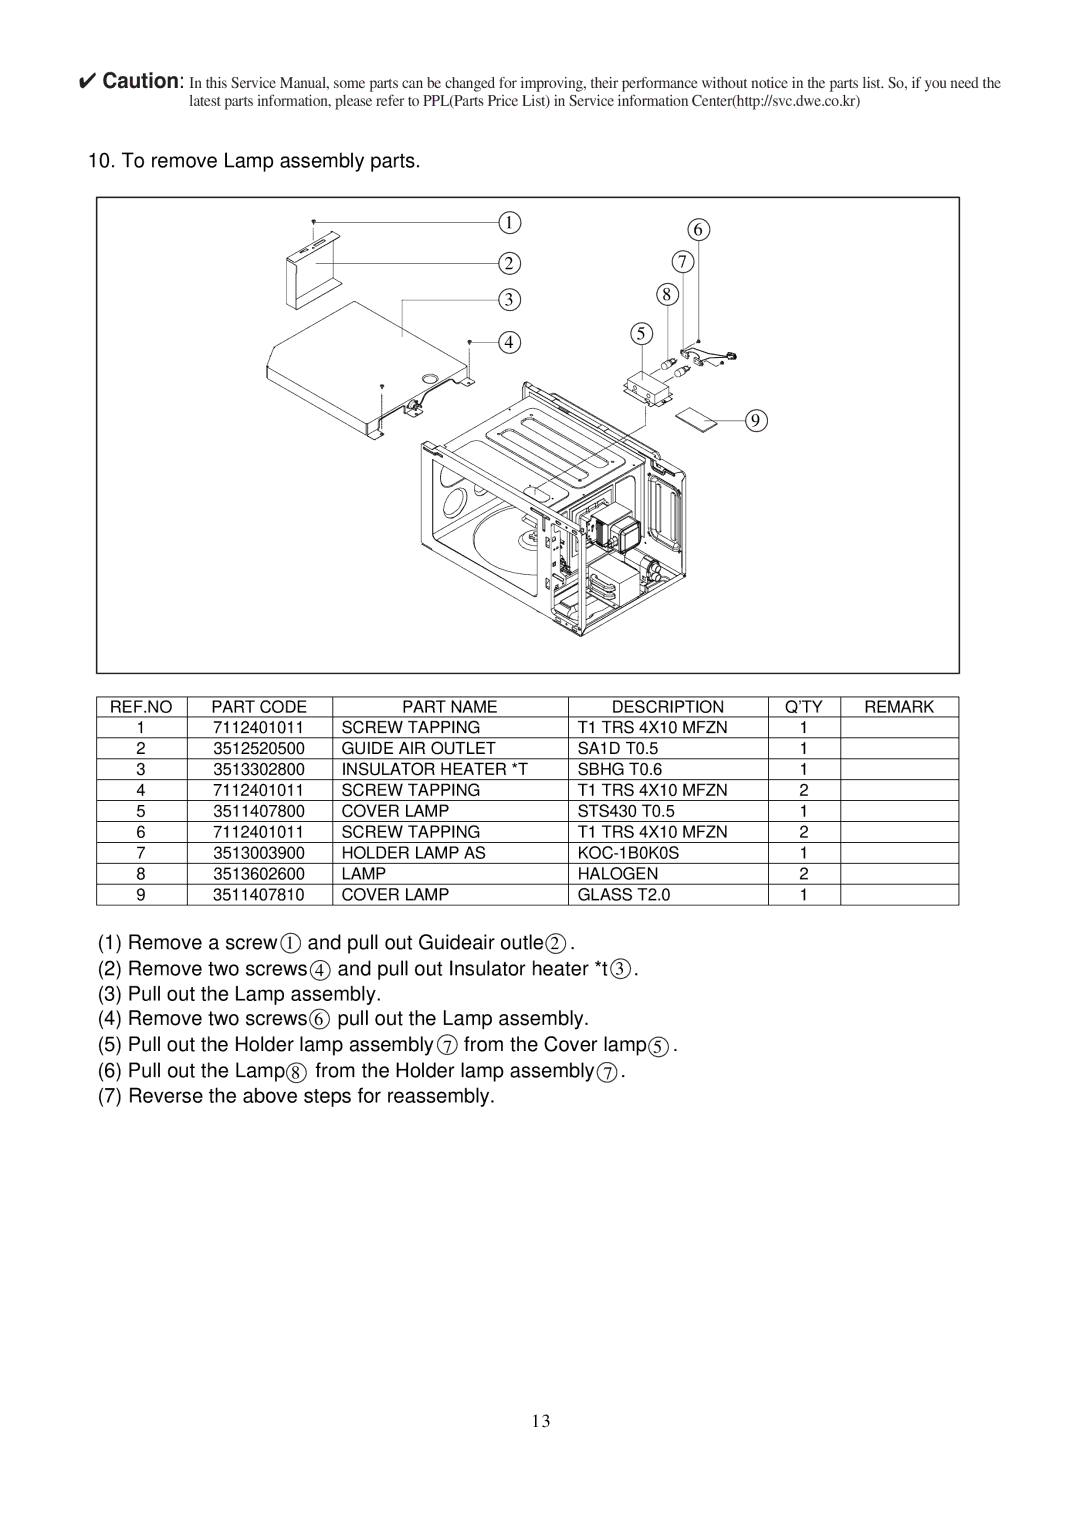 Daewoo KOC-1B0K0S service manual To remove Lamp assembly parts 